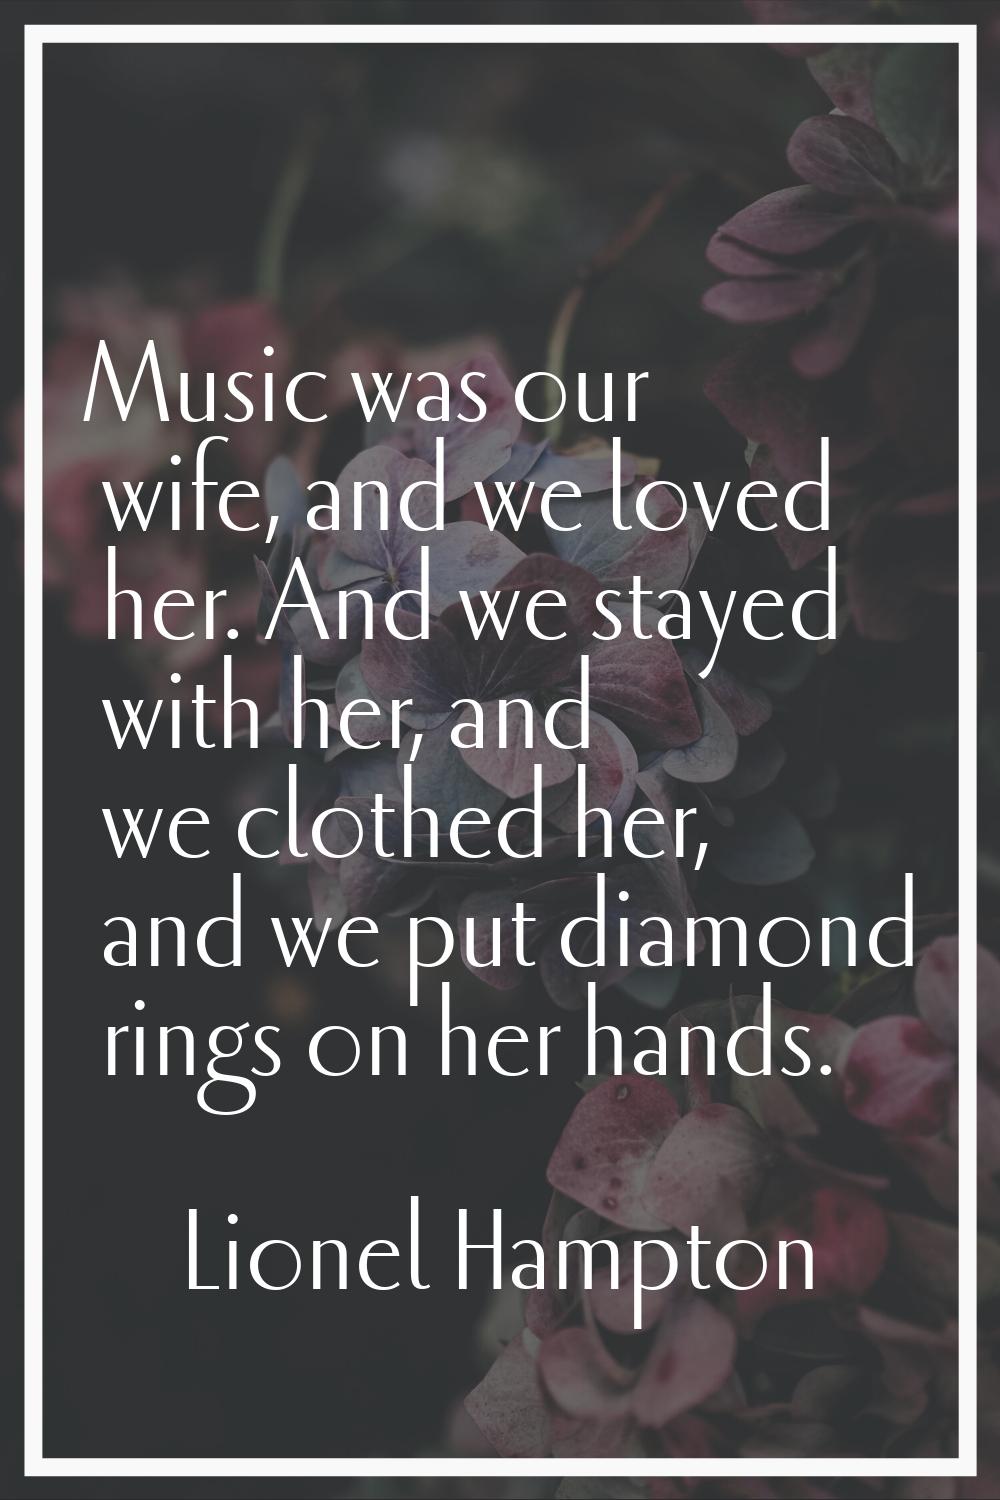 Music was our wife, and we loved her. And we stayed with her, and we clothed her, and we put diamon